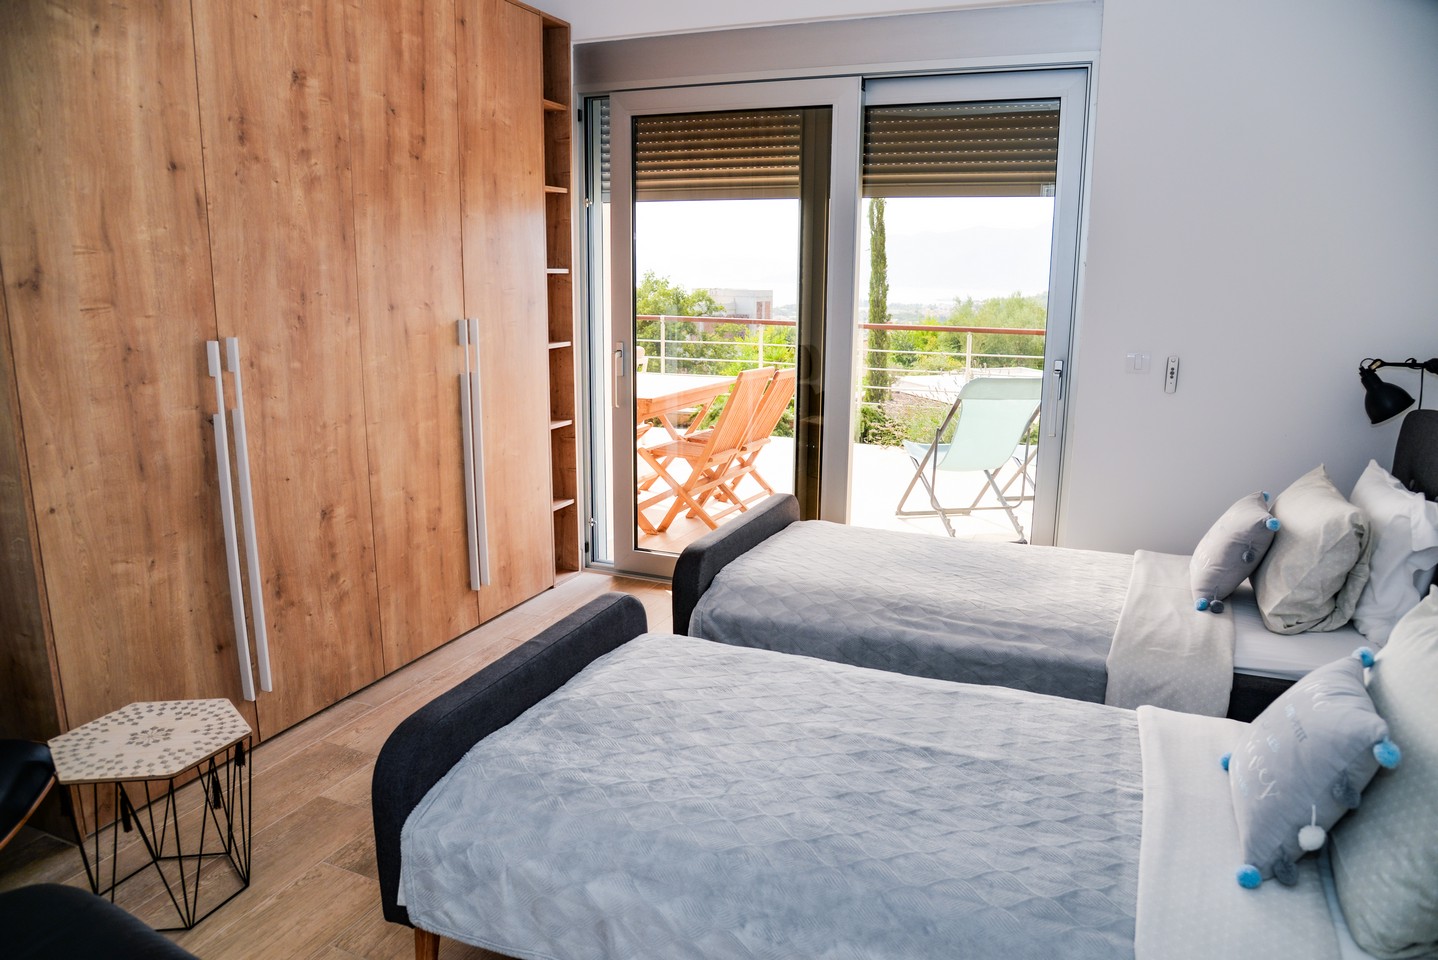 Tivat Heights Residence, Montenegro - Guest bedroom and panoramic terrace sea view Tivat Bay